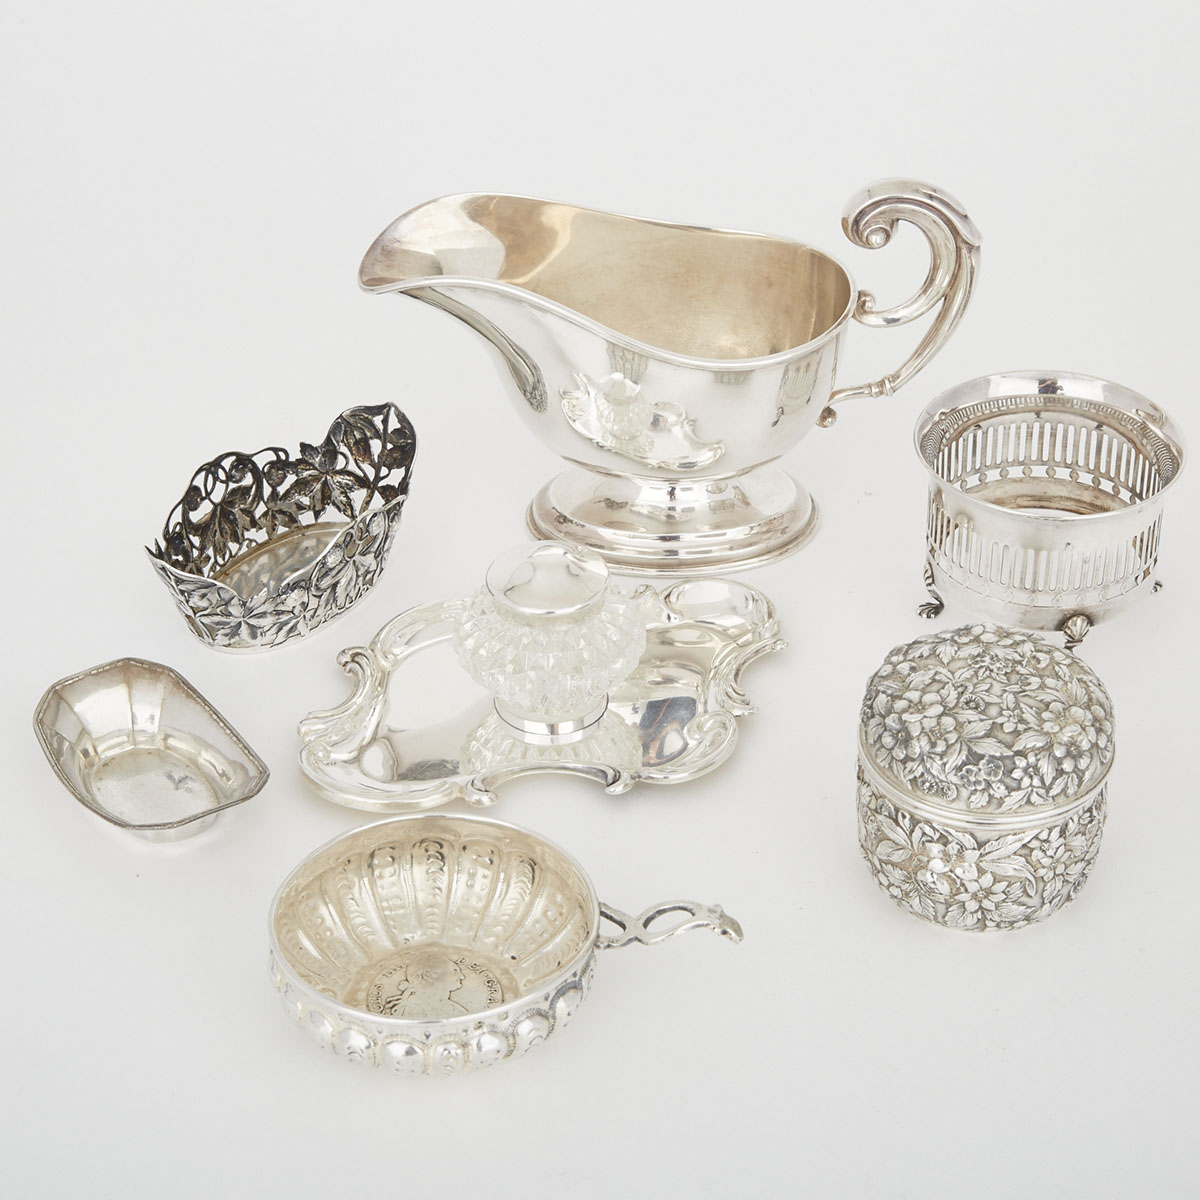 Group of Mainly North American Silver, late 19th/20th century